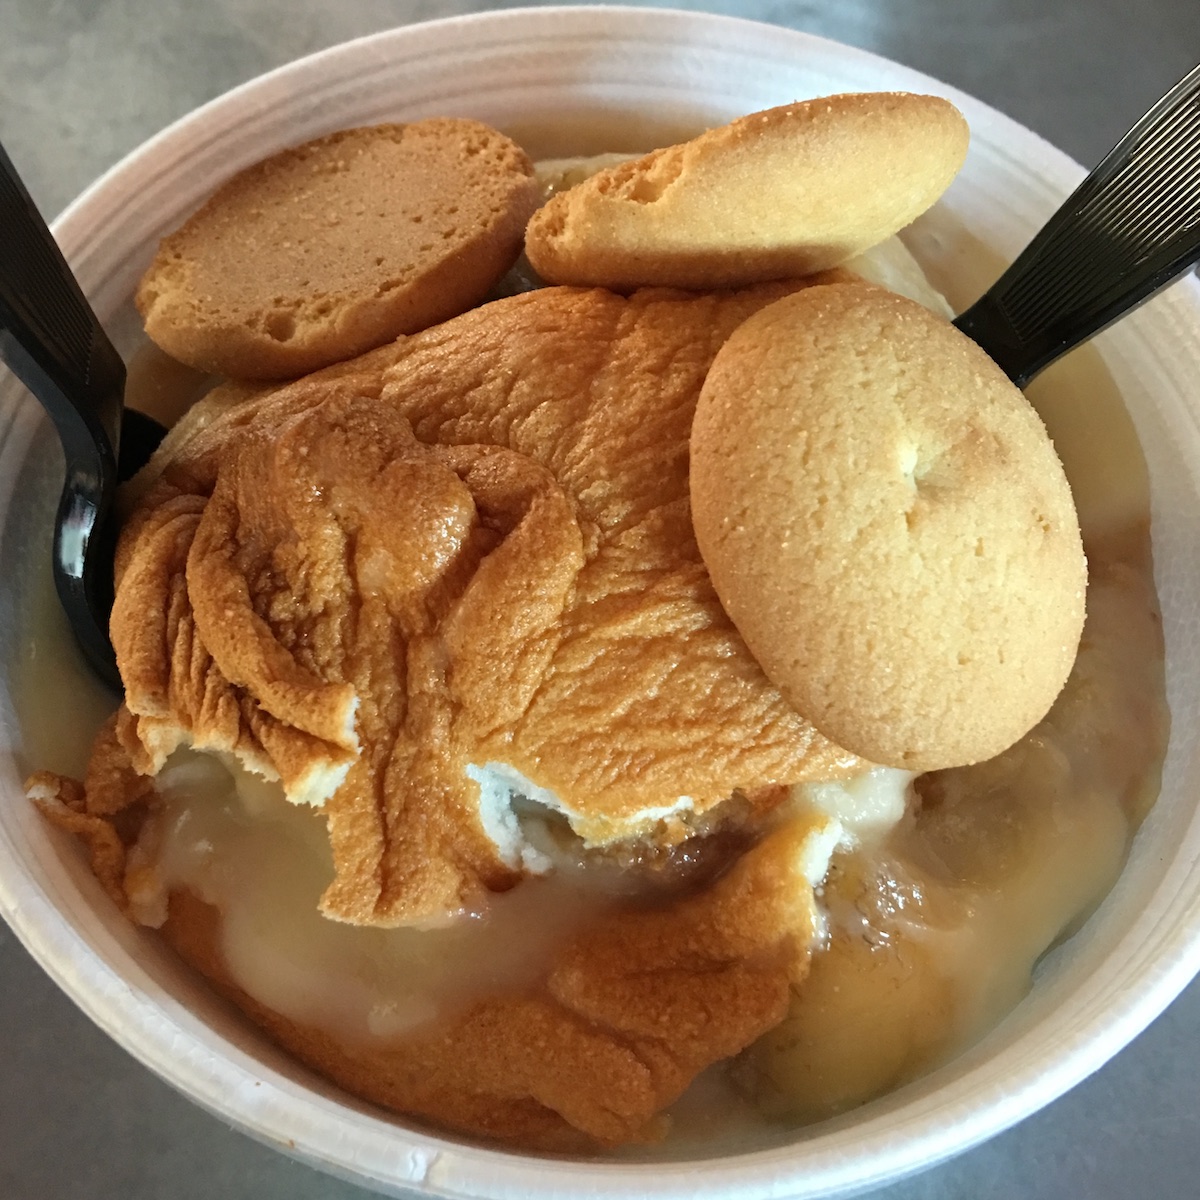 Banana Pudding from Hattie B's in Nashville, Tennessee